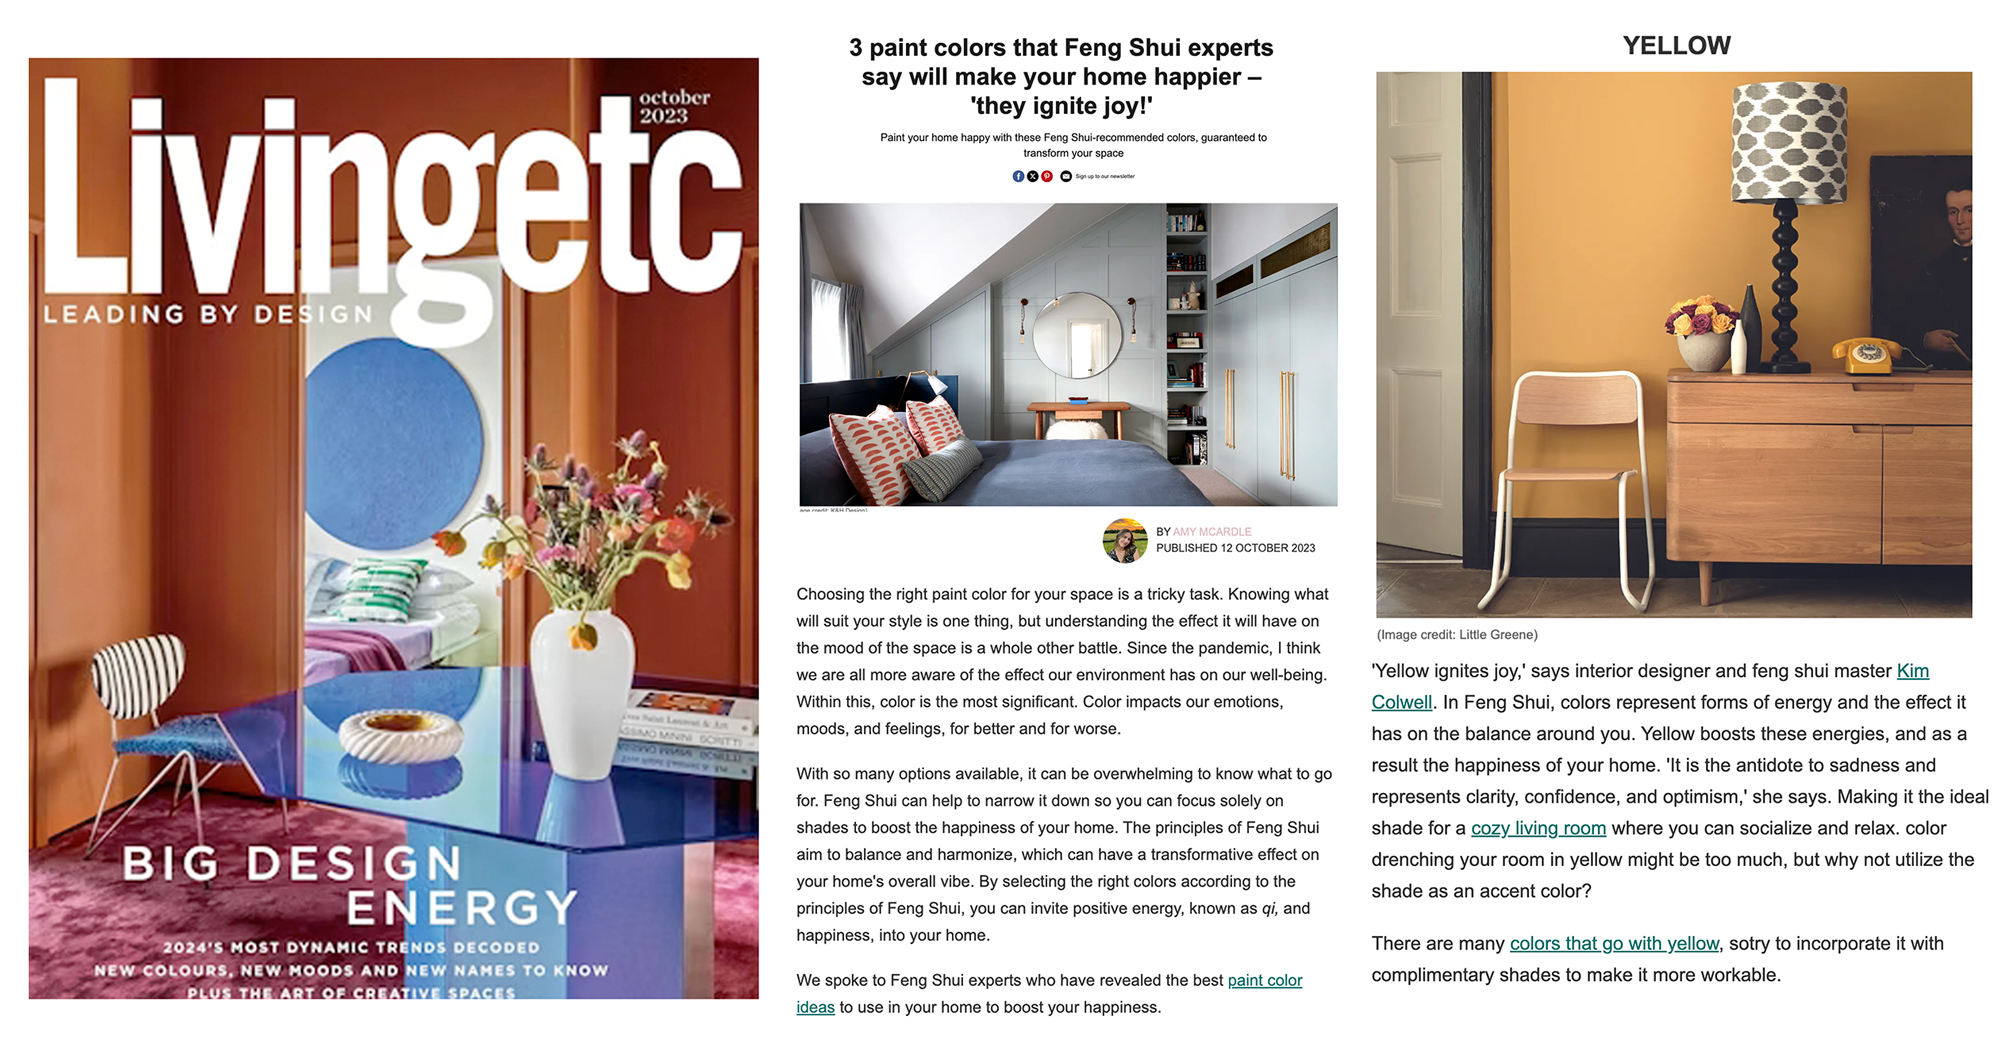 Living Etc magazine interview with Kim Colwell, Los Angeles transformative interior designer and 2nd generation feng shui master. 